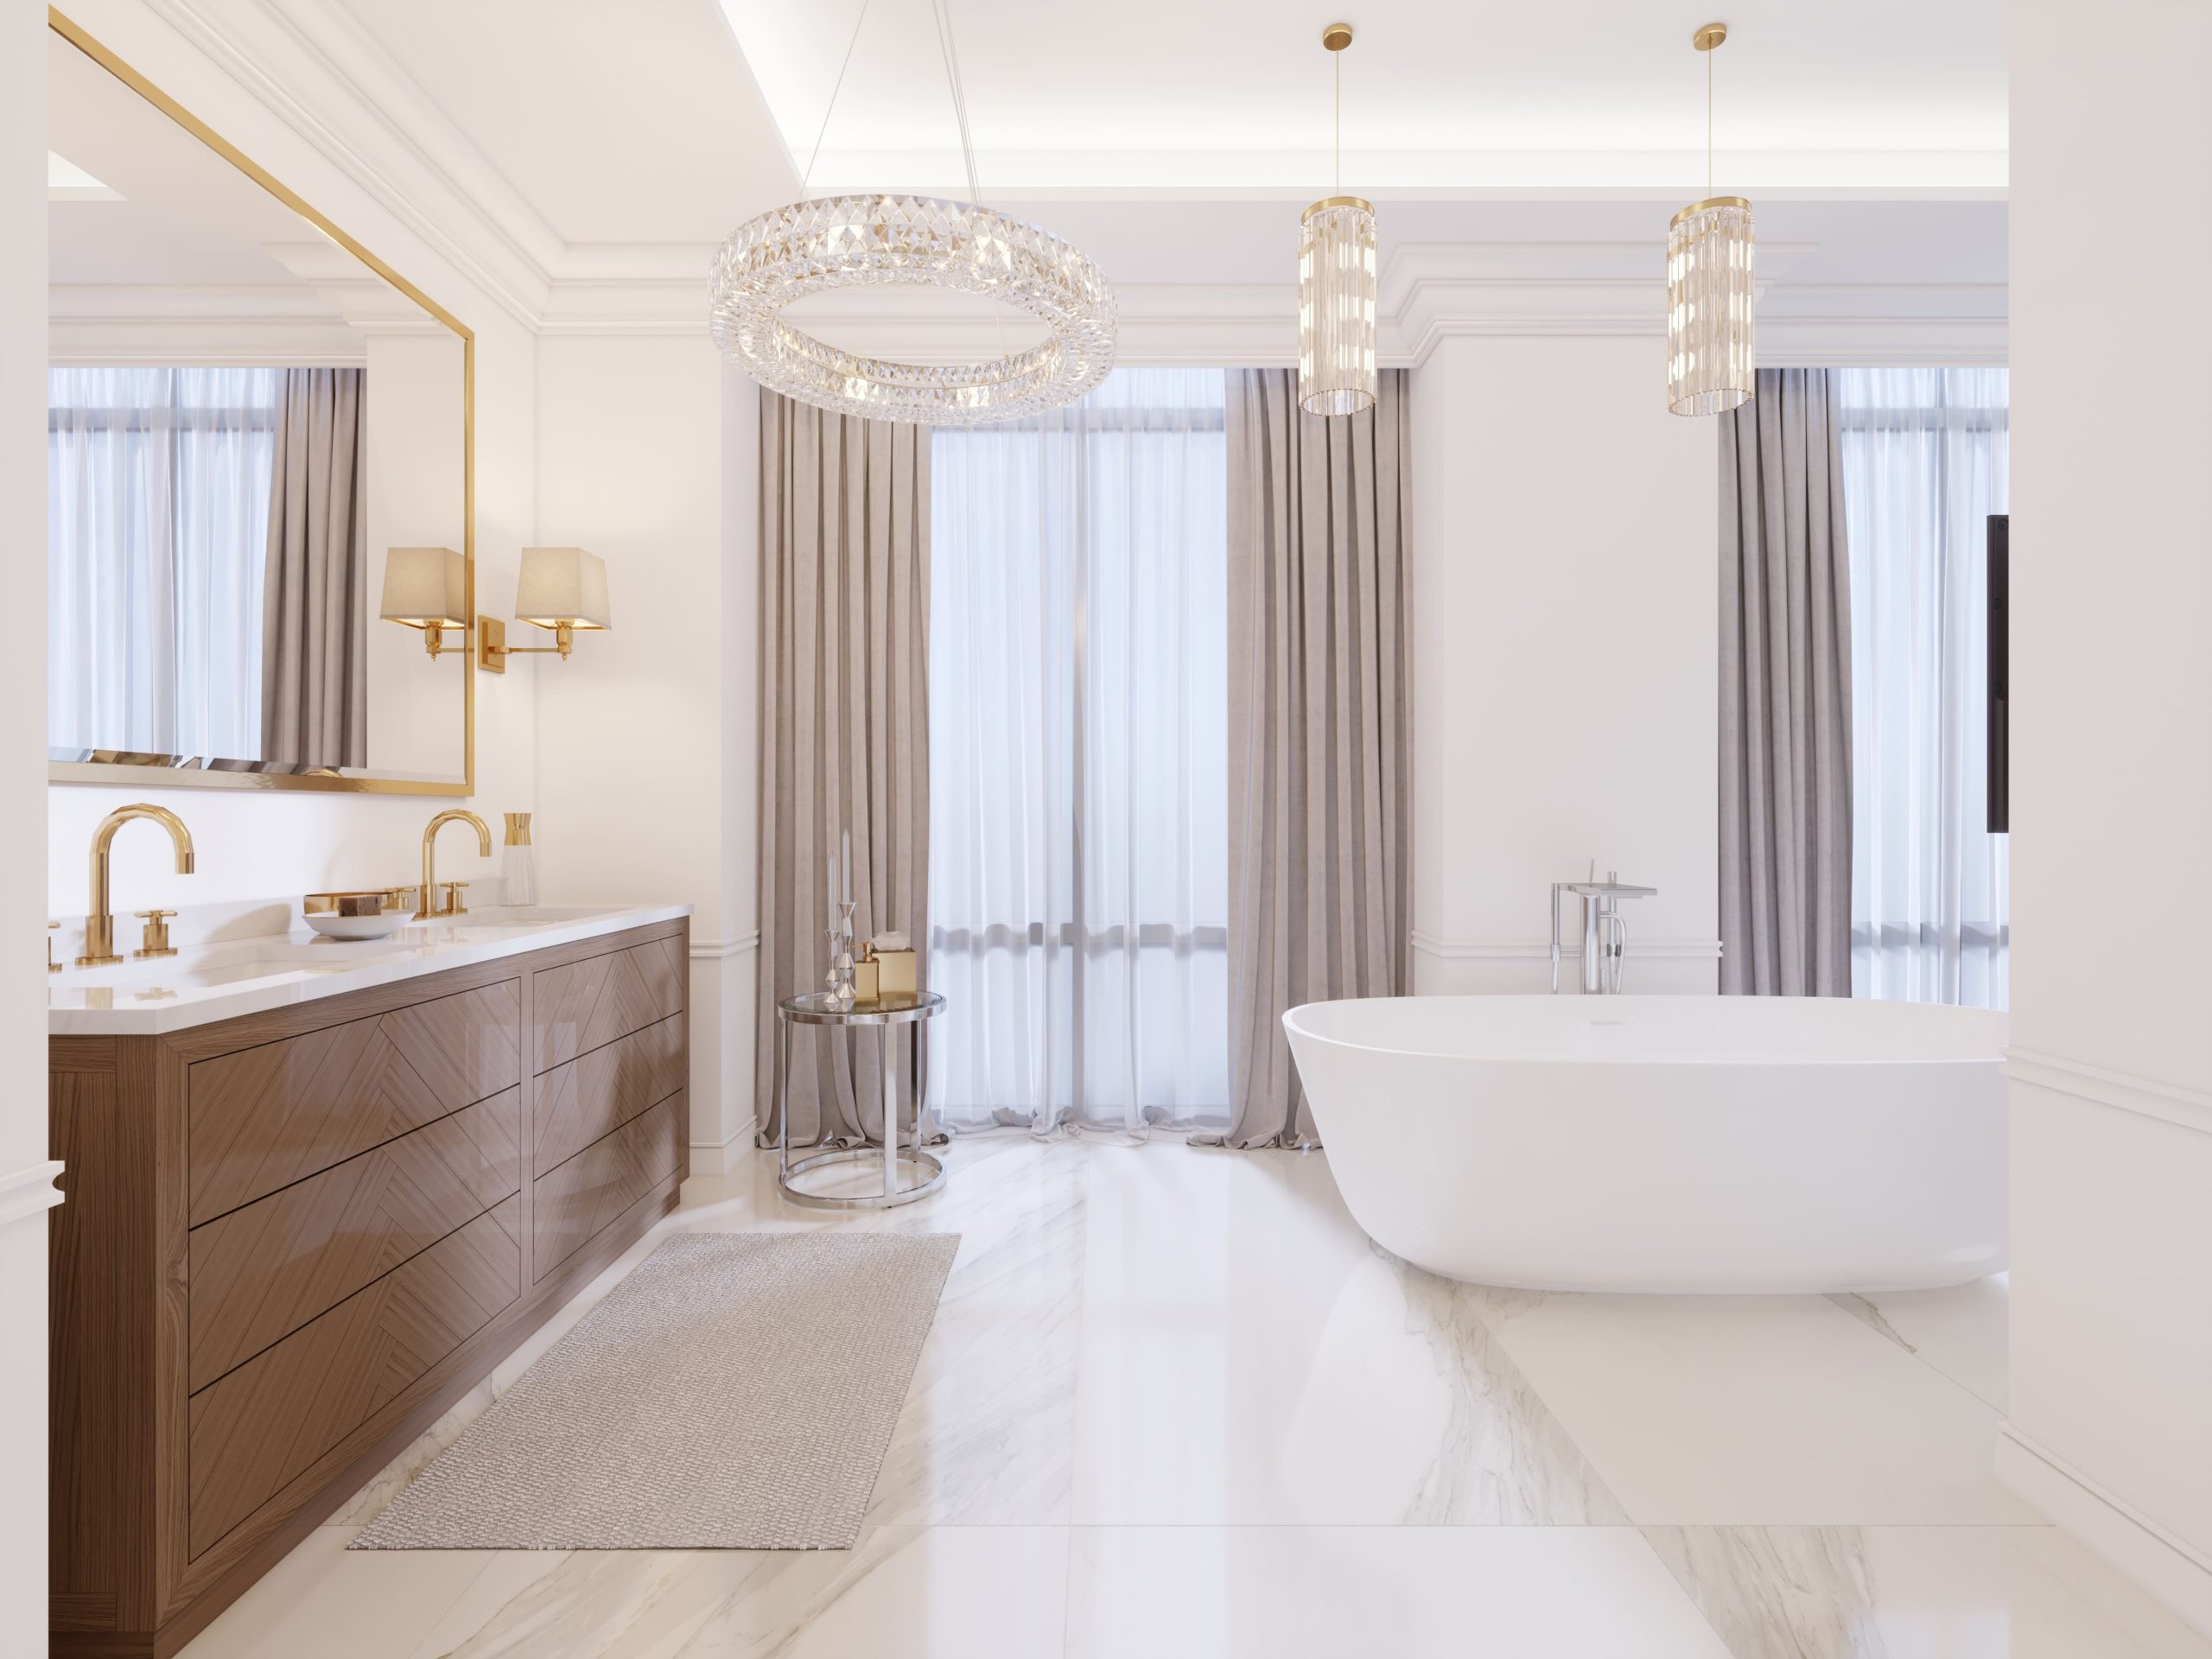 Are you tired of dim and dull lighting in your bathroom? Upgrade your space with integrated lighting that not only provides better visibility but also creates a warm and inviting atmosphere. With integrated lighting, you can transform your bathroom into a soothing oasis where you can relax and unwind.